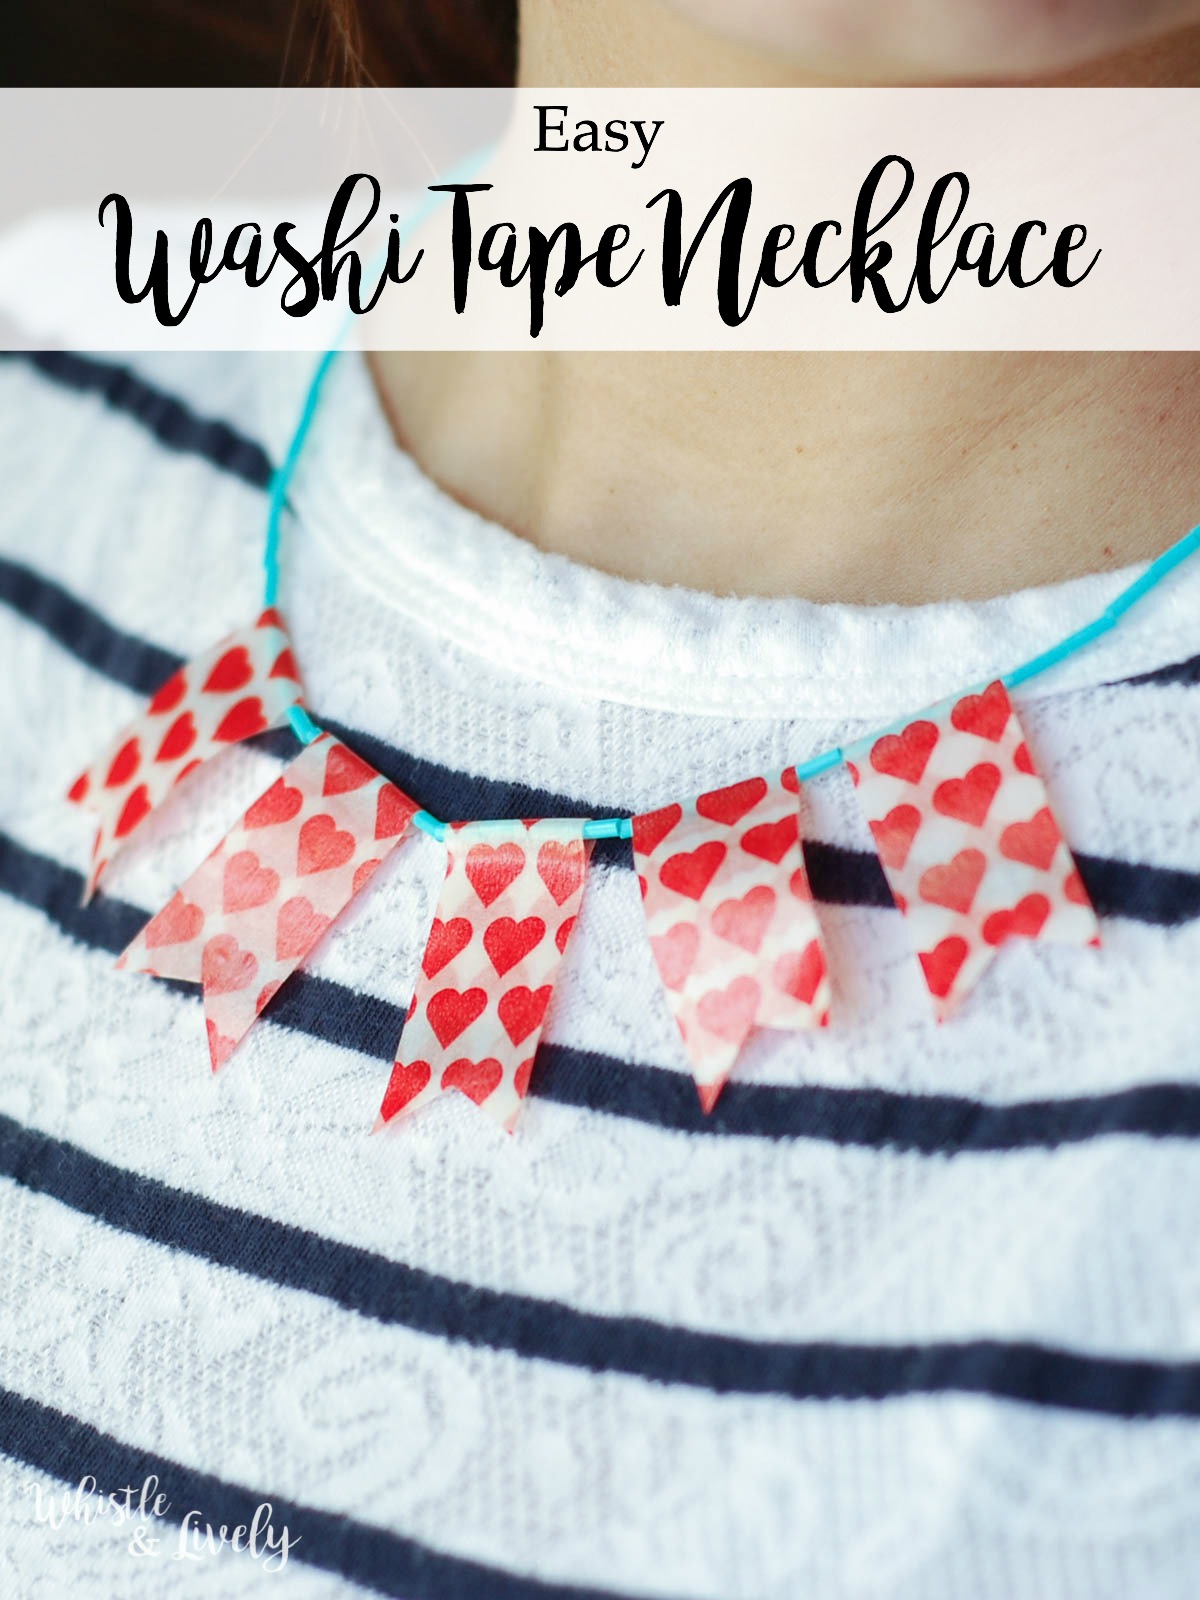 Easy DIY - Washi Tape Necklace | Make this cute, trendy washi tape necklace with a few supplies and in just a few minutes! So many colors to choose from and a perfect craft for kids.